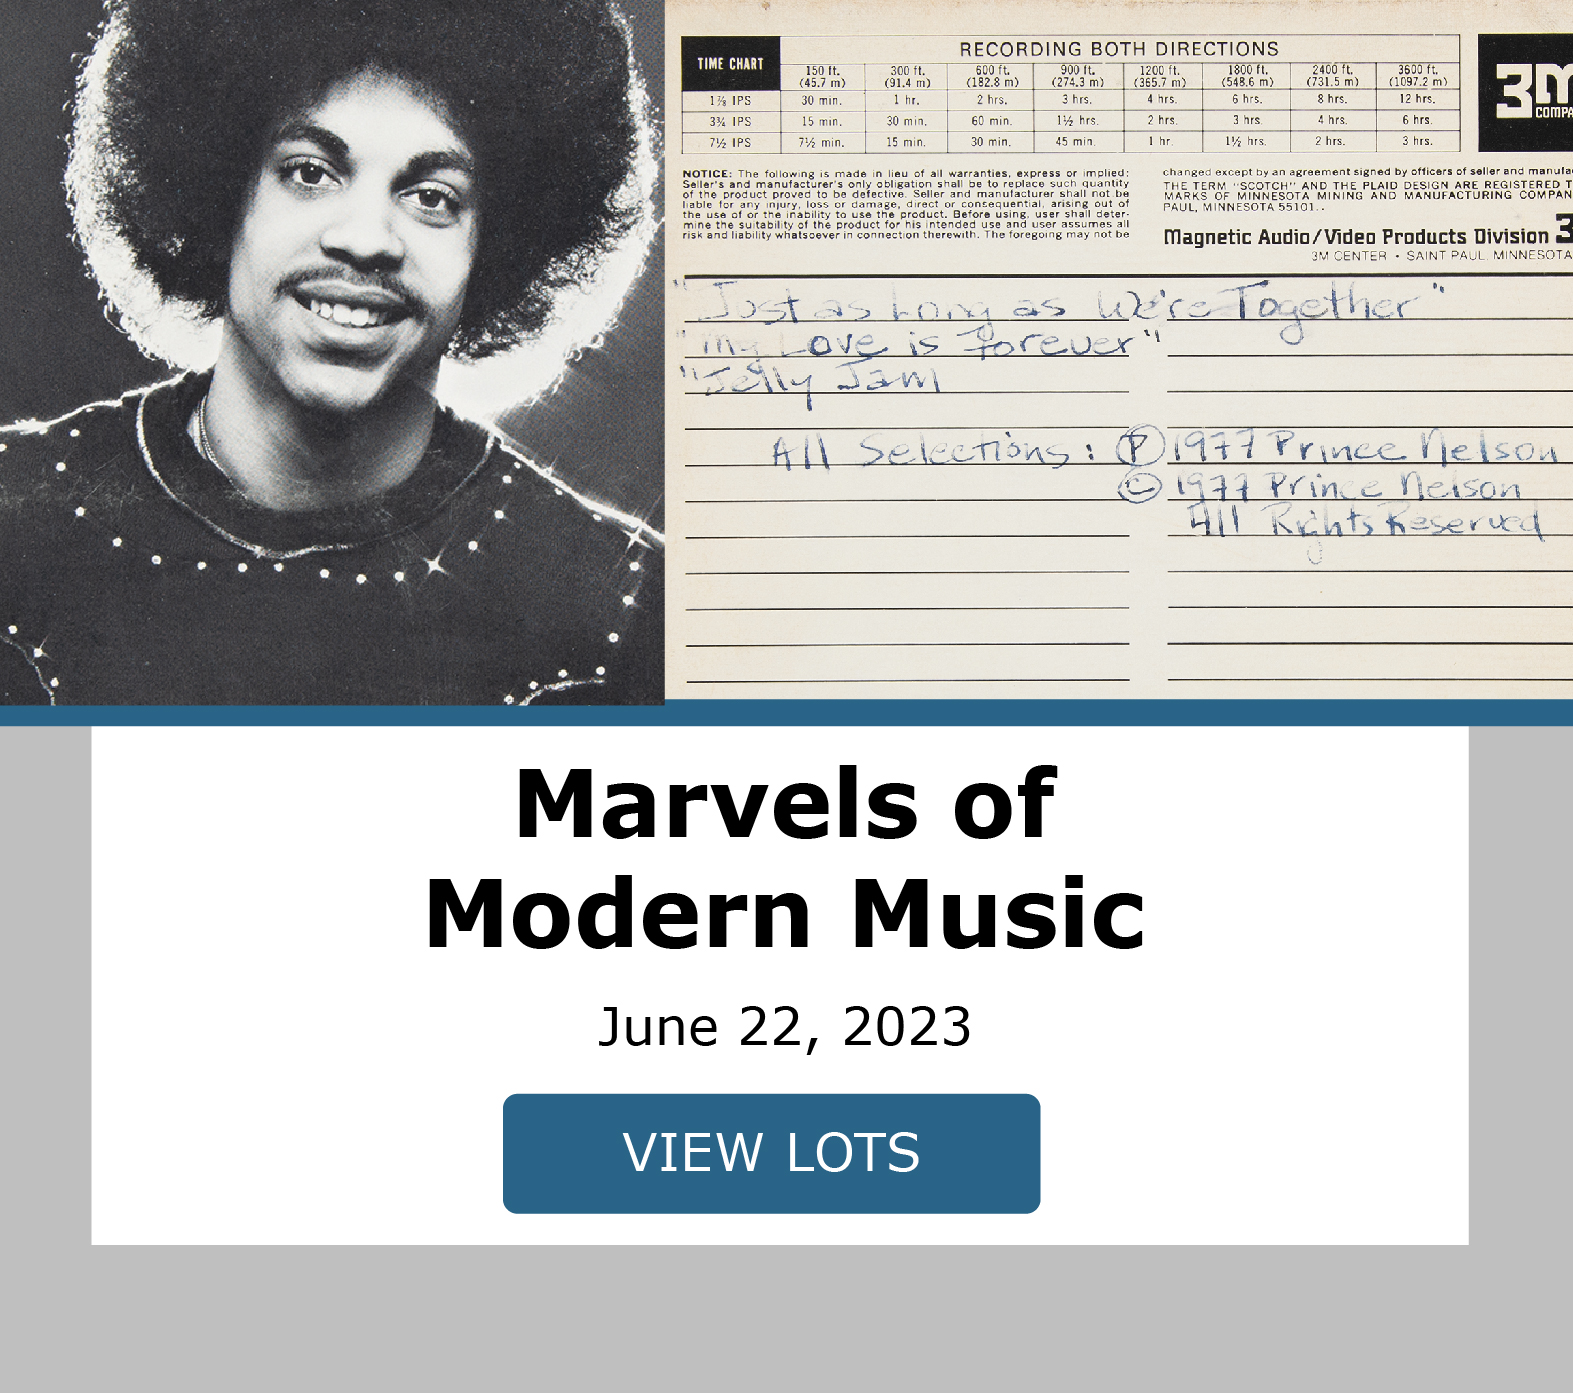 Marvels of Modern Music! Bidding ends June 22, 2023. View Lots!